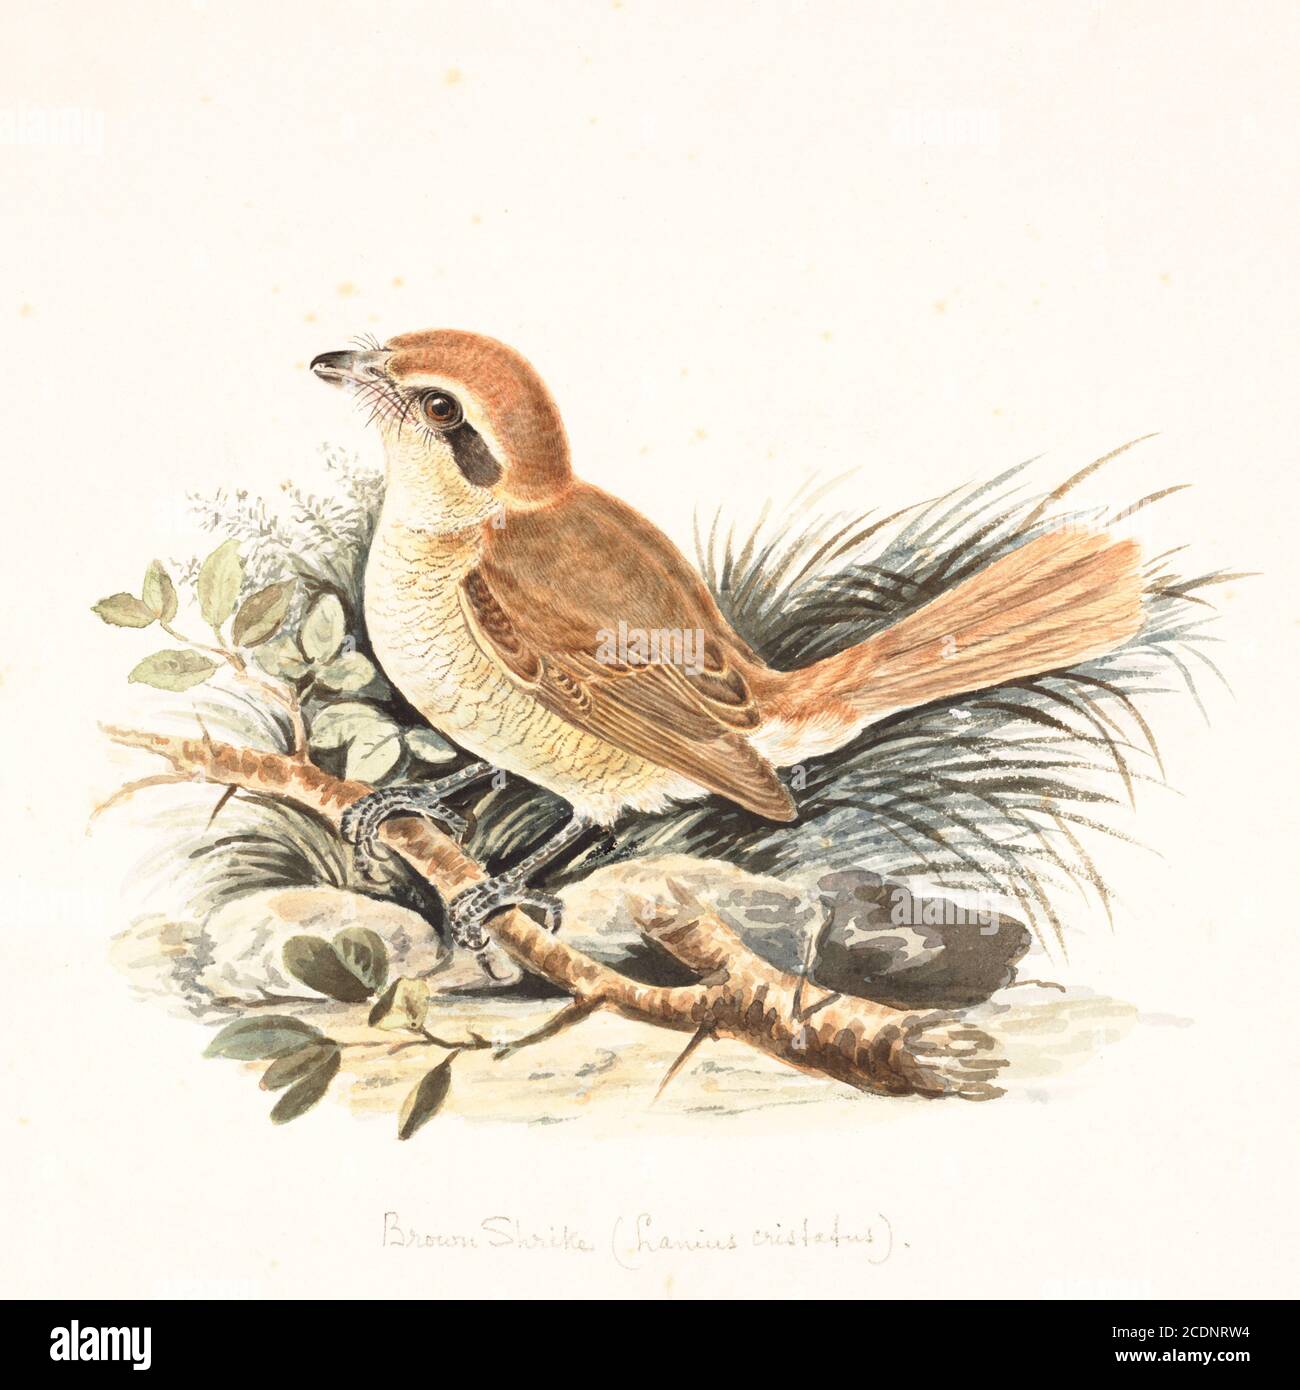 The brown shrike (Lanius cristatus) is a bird in the shrike family that is found mainly in Asia. It is closely related to the red-backed shrike (L. collurio) and isabelline shrike (L. isabellinus). The genus name, Lanius, is derived from the Latin word for 'butcher', and some shrikes are also known as 'butcher birds' because of their feeding habits. The specific cristatus is Latin for 'crested', used in a broader sense than in English. The common English name 'shrike' is from Old English scríc, 'shriek', referring to the shrill call. 18th century watercolor painting by Elizabeth Gwillim. Lady Stock Photo